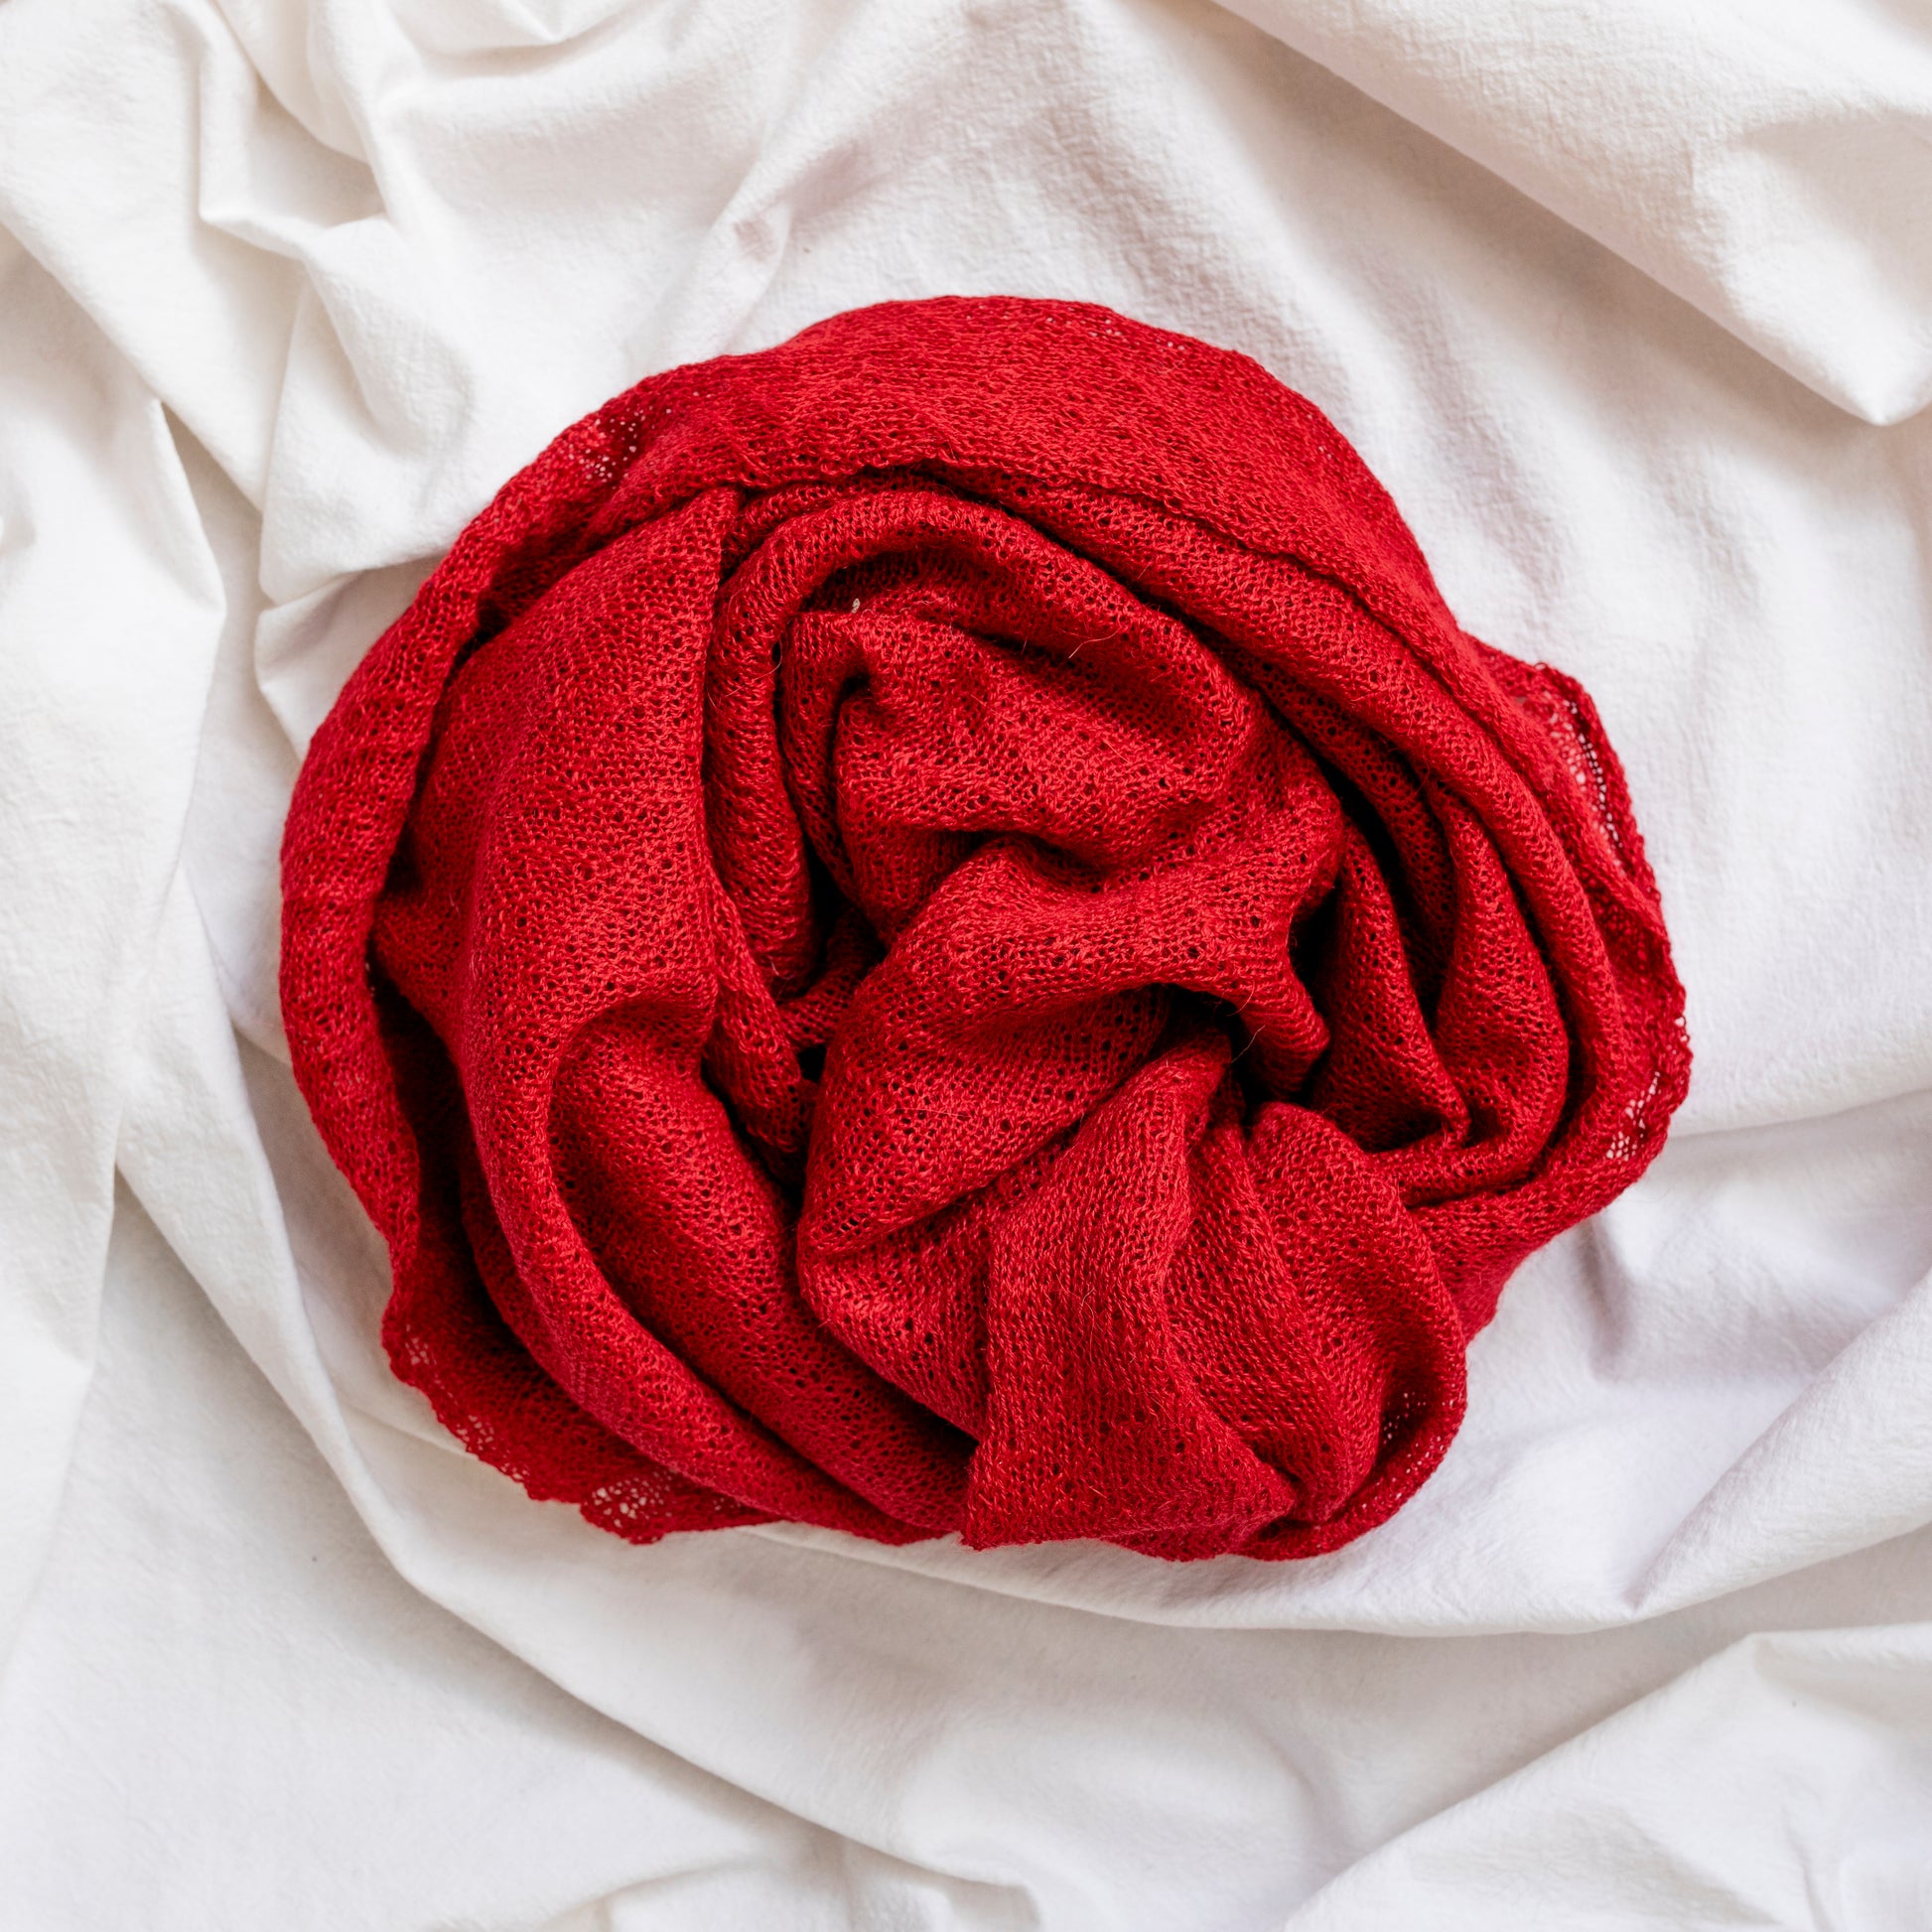 Berry red coloured lightweight and delicately woven scarf. Hand-made by artisans.